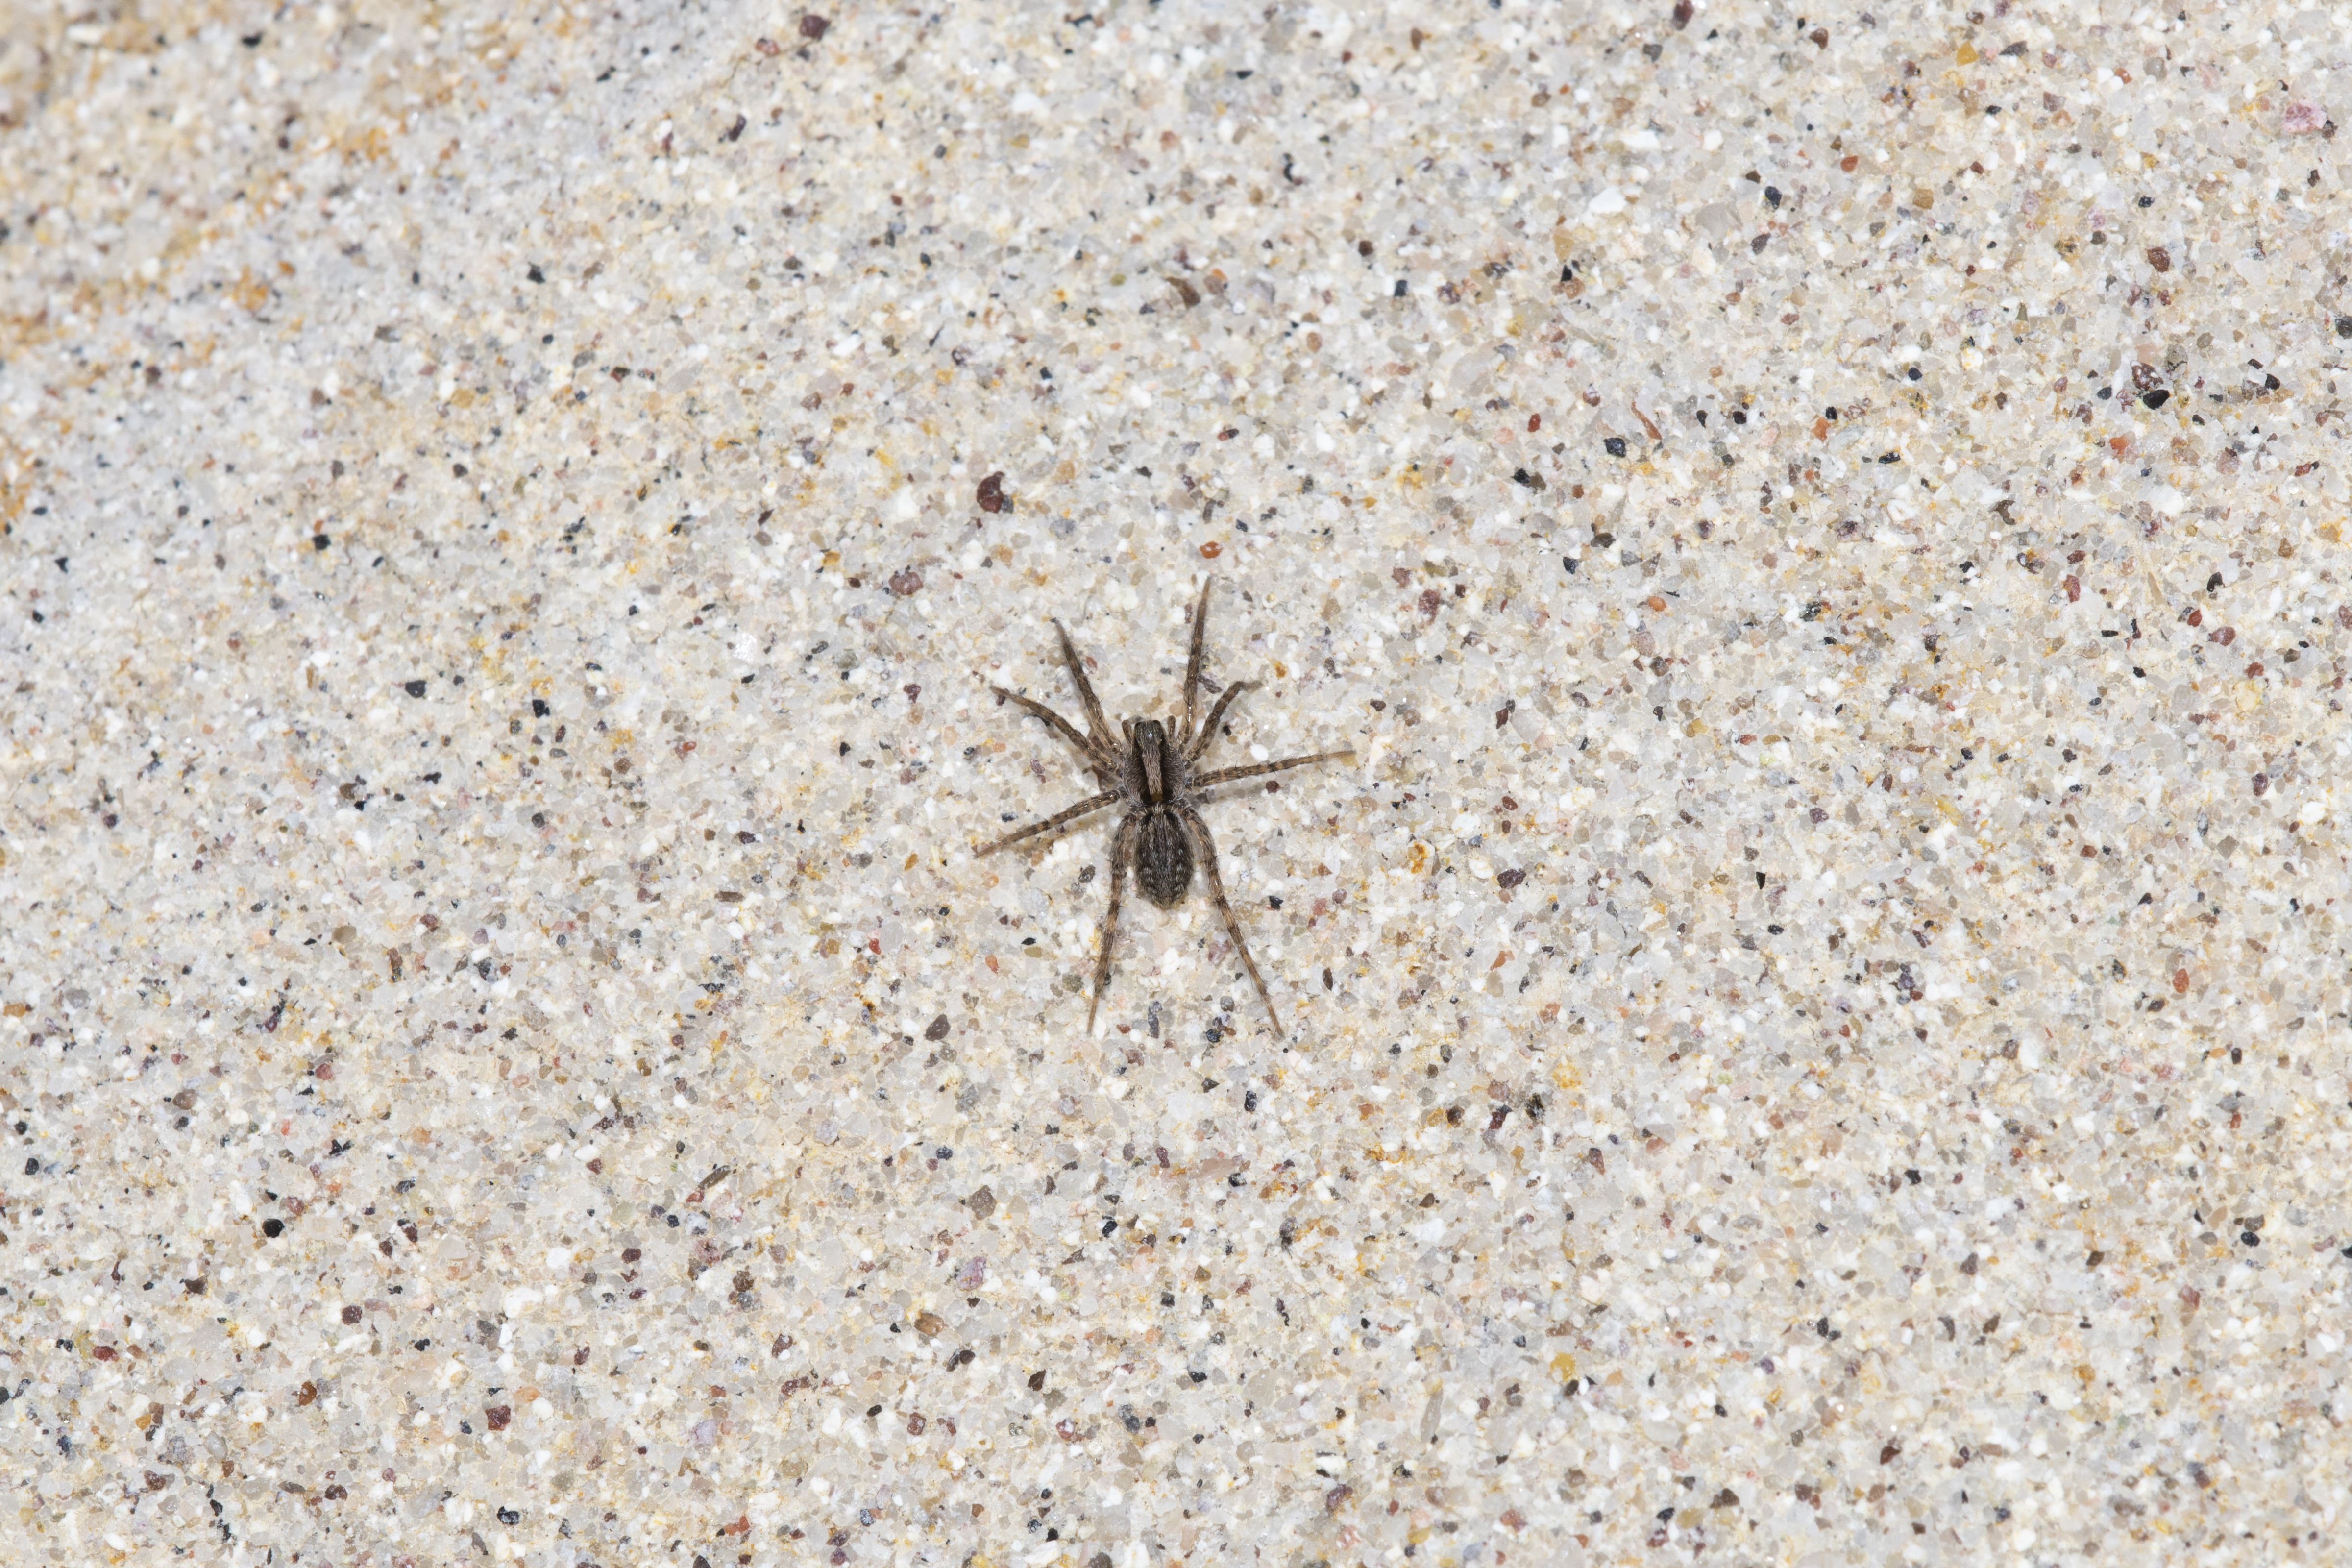 7 pholcid spider facts you need to know - Discover Wildlife